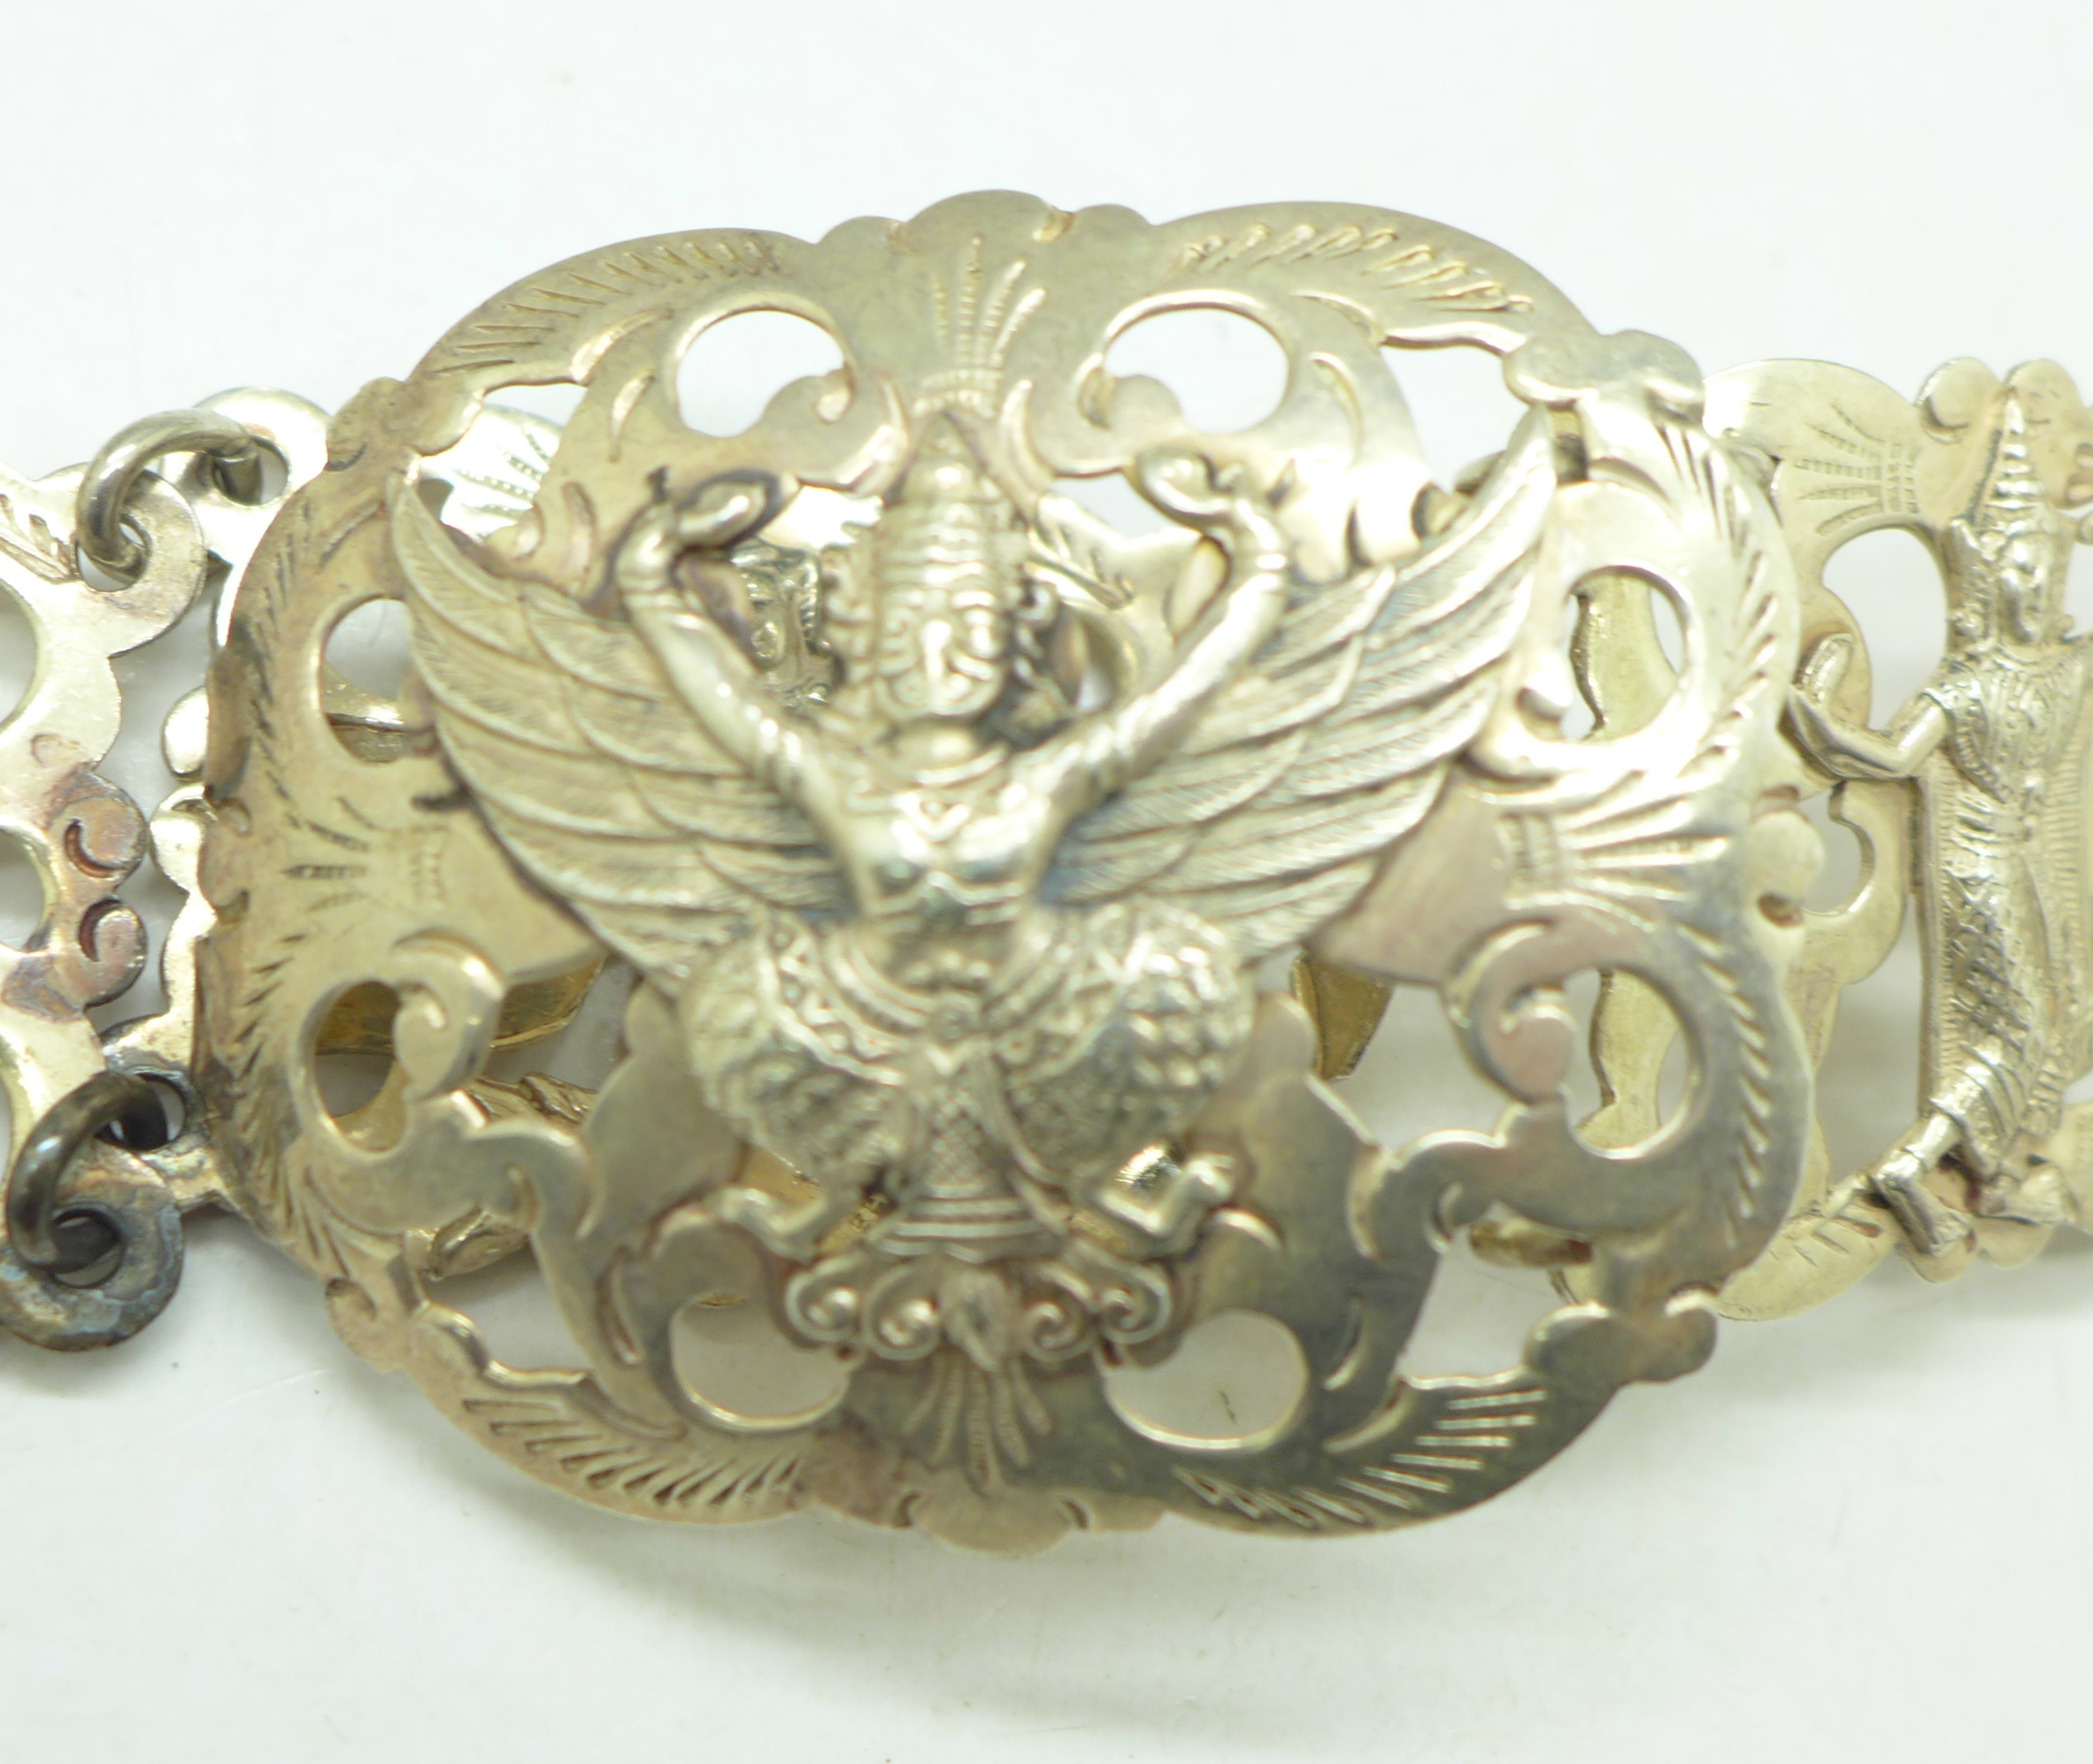 A Siam sterling silver belt, 193g, (fastening clip requires repair) - Image 3 of 8